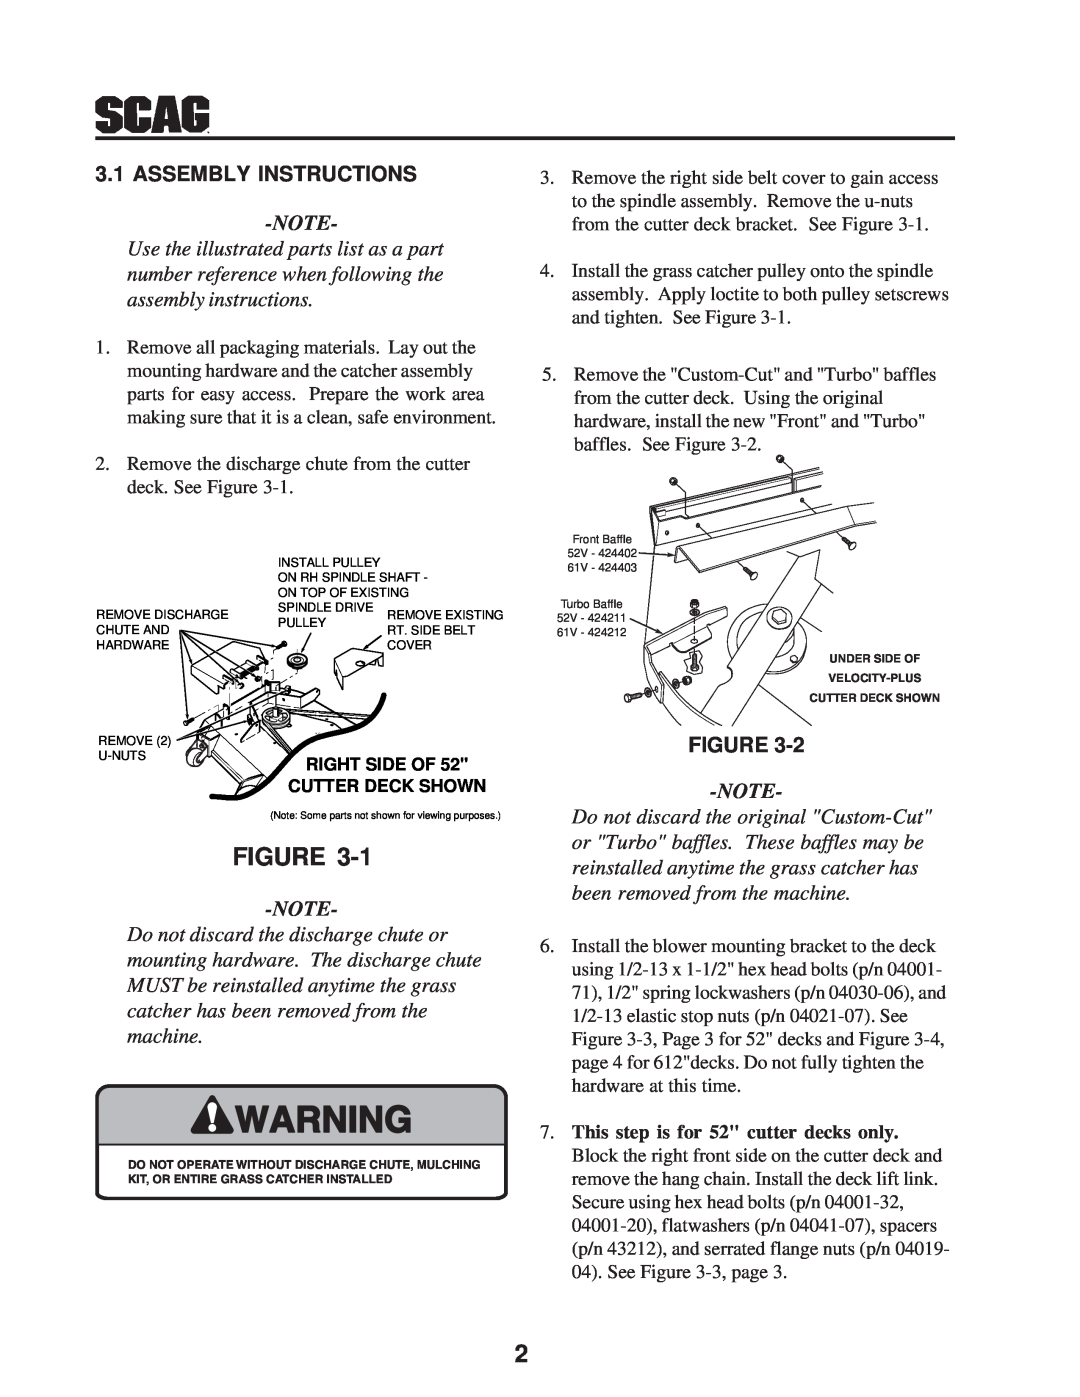 Scag Power Equipment GC-STT-V operating instructions Assembly Instructions, Use the illustrated parts list as a part 